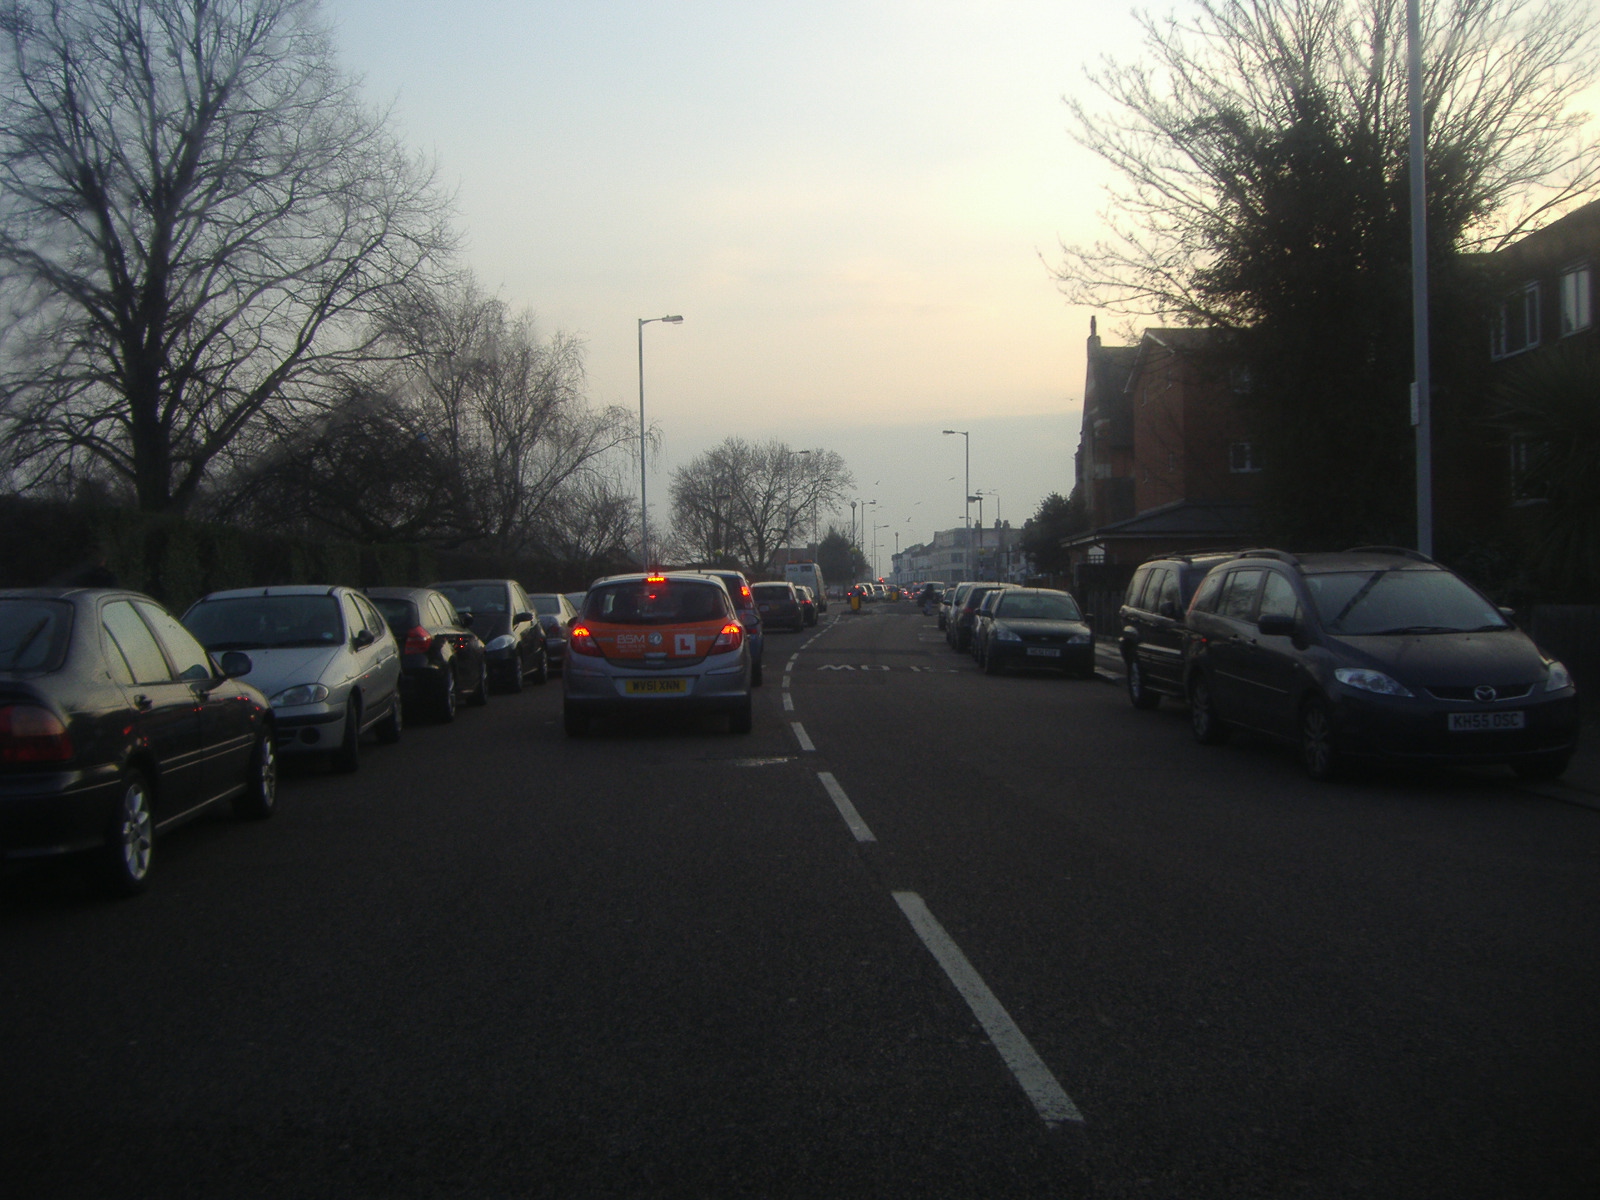 several cars are seen in a road, near one another